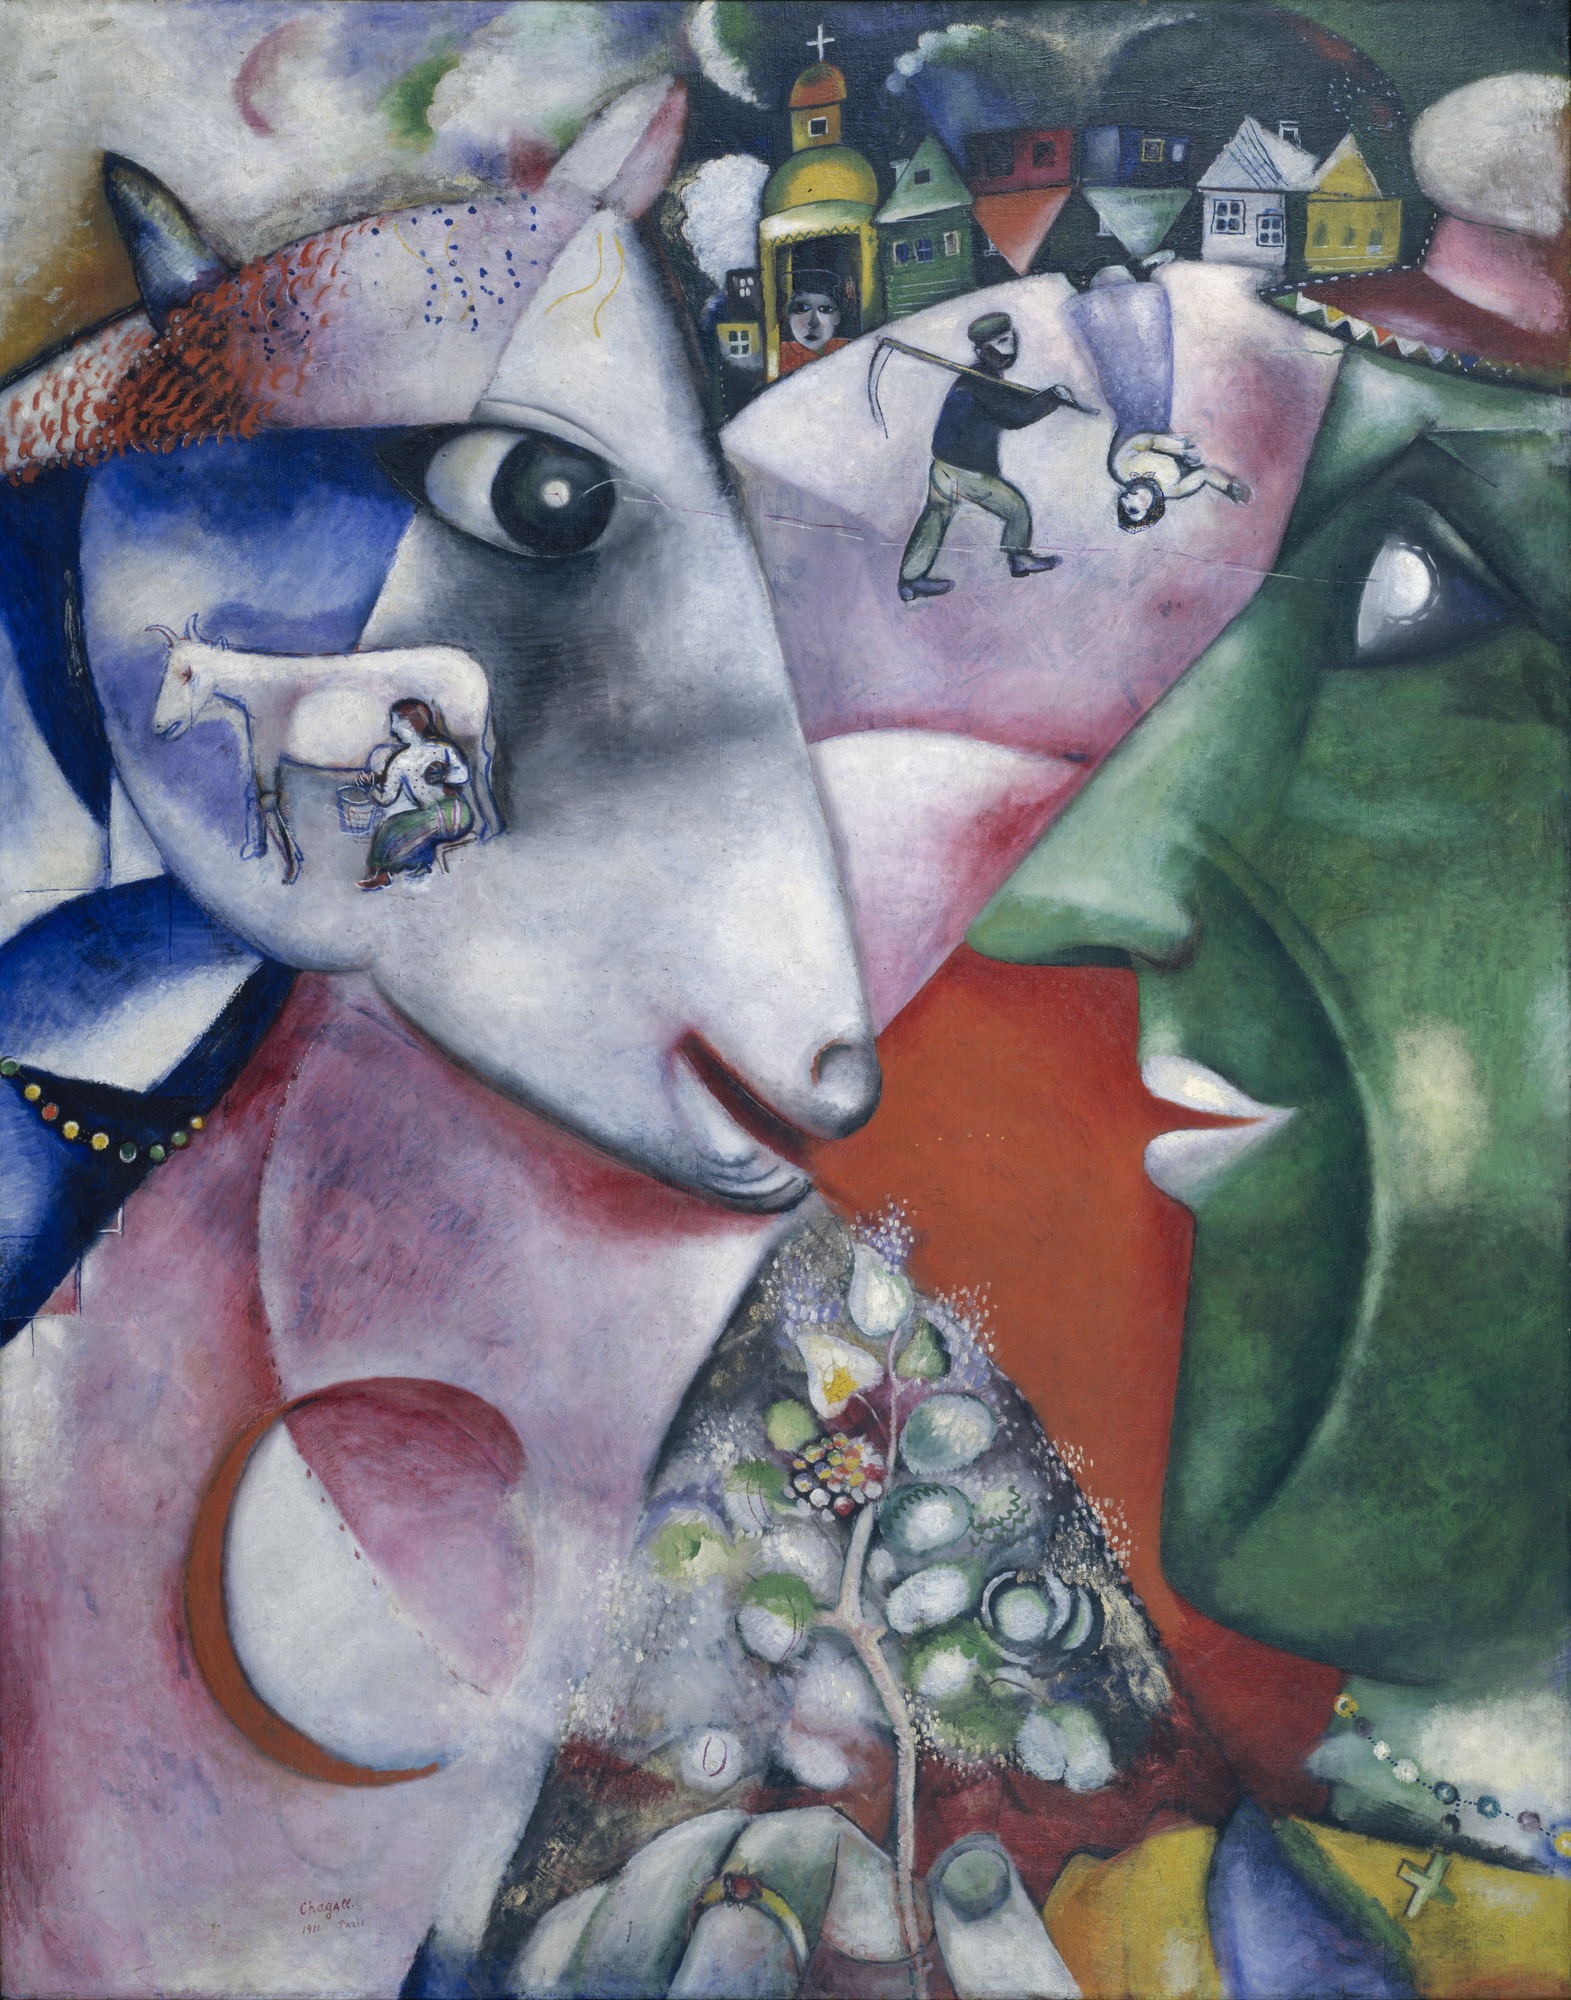 I and the Village by Marc Chagall - 1911 - 191 x 150.5 cm Museum of Modern Art